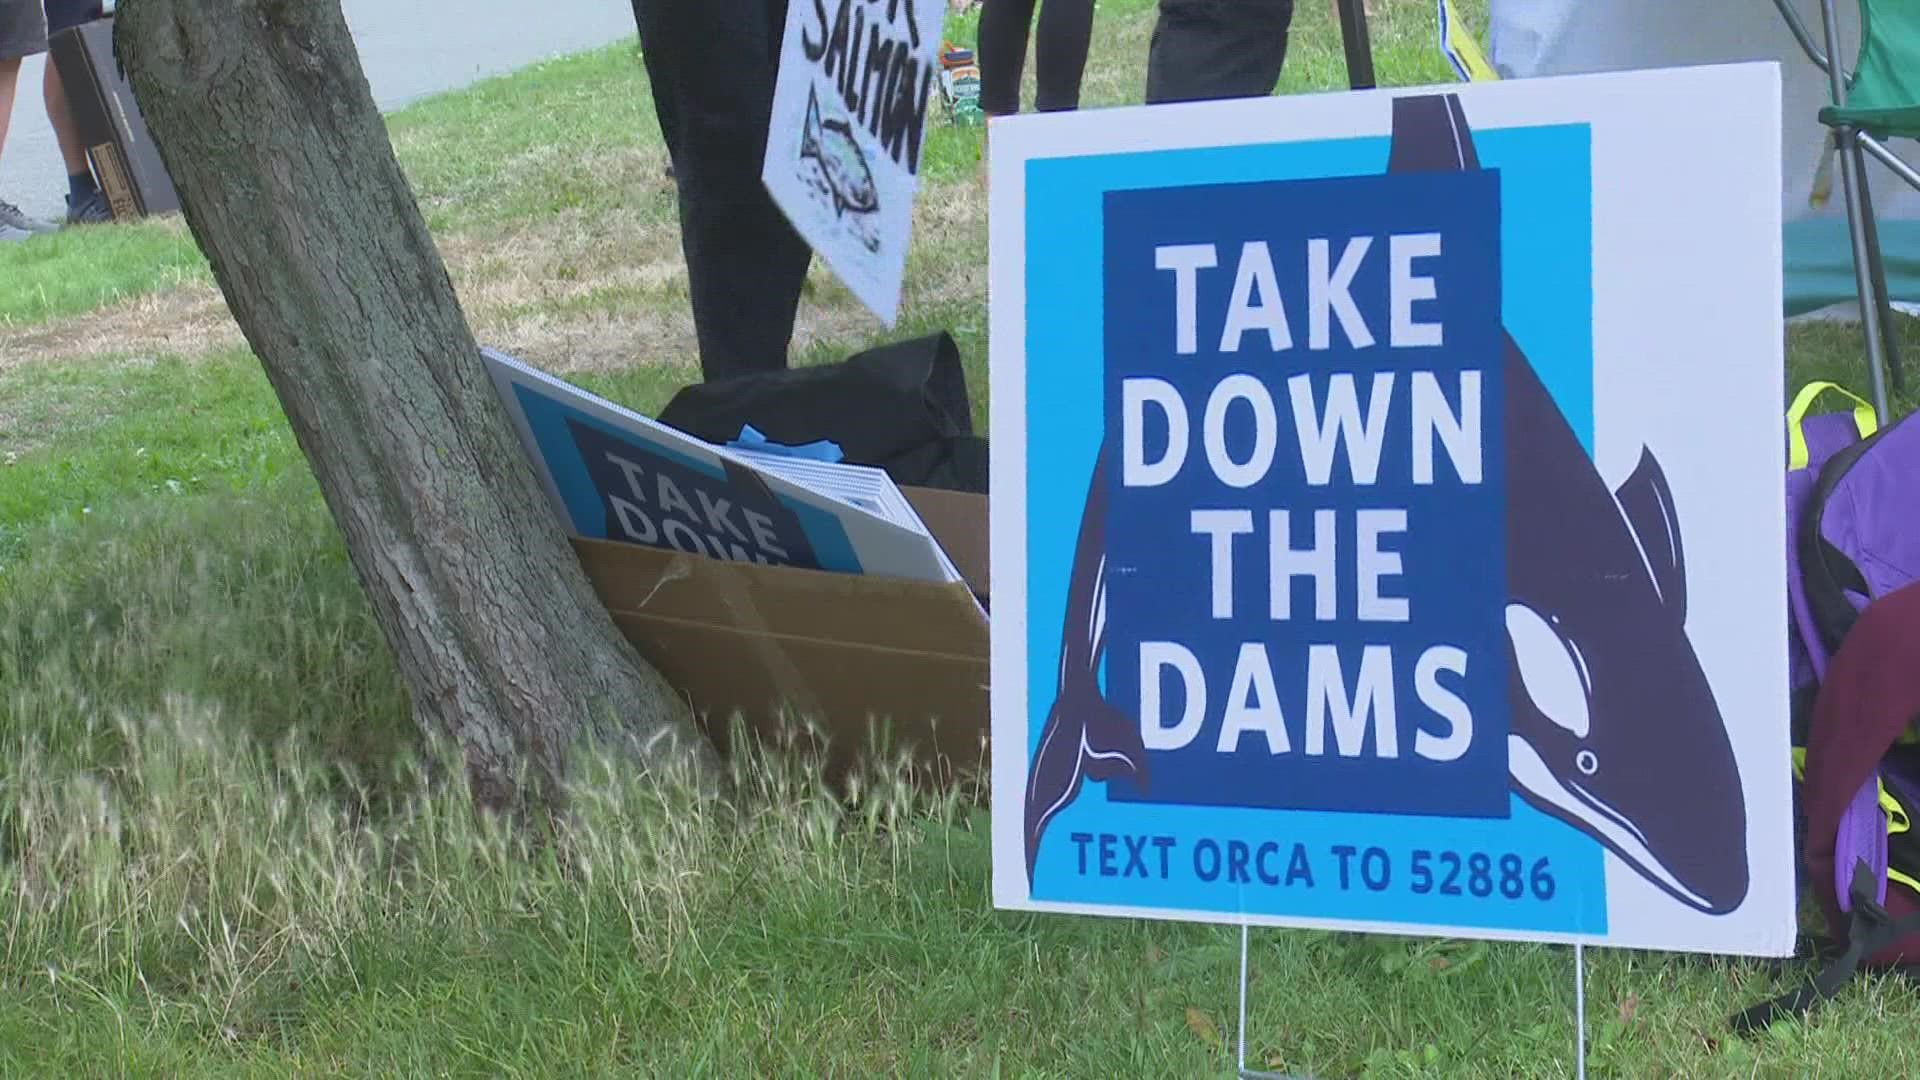 The groups want the dams removed to save salmon and replaced with other sources of renewable energy from things like electrifying railways.